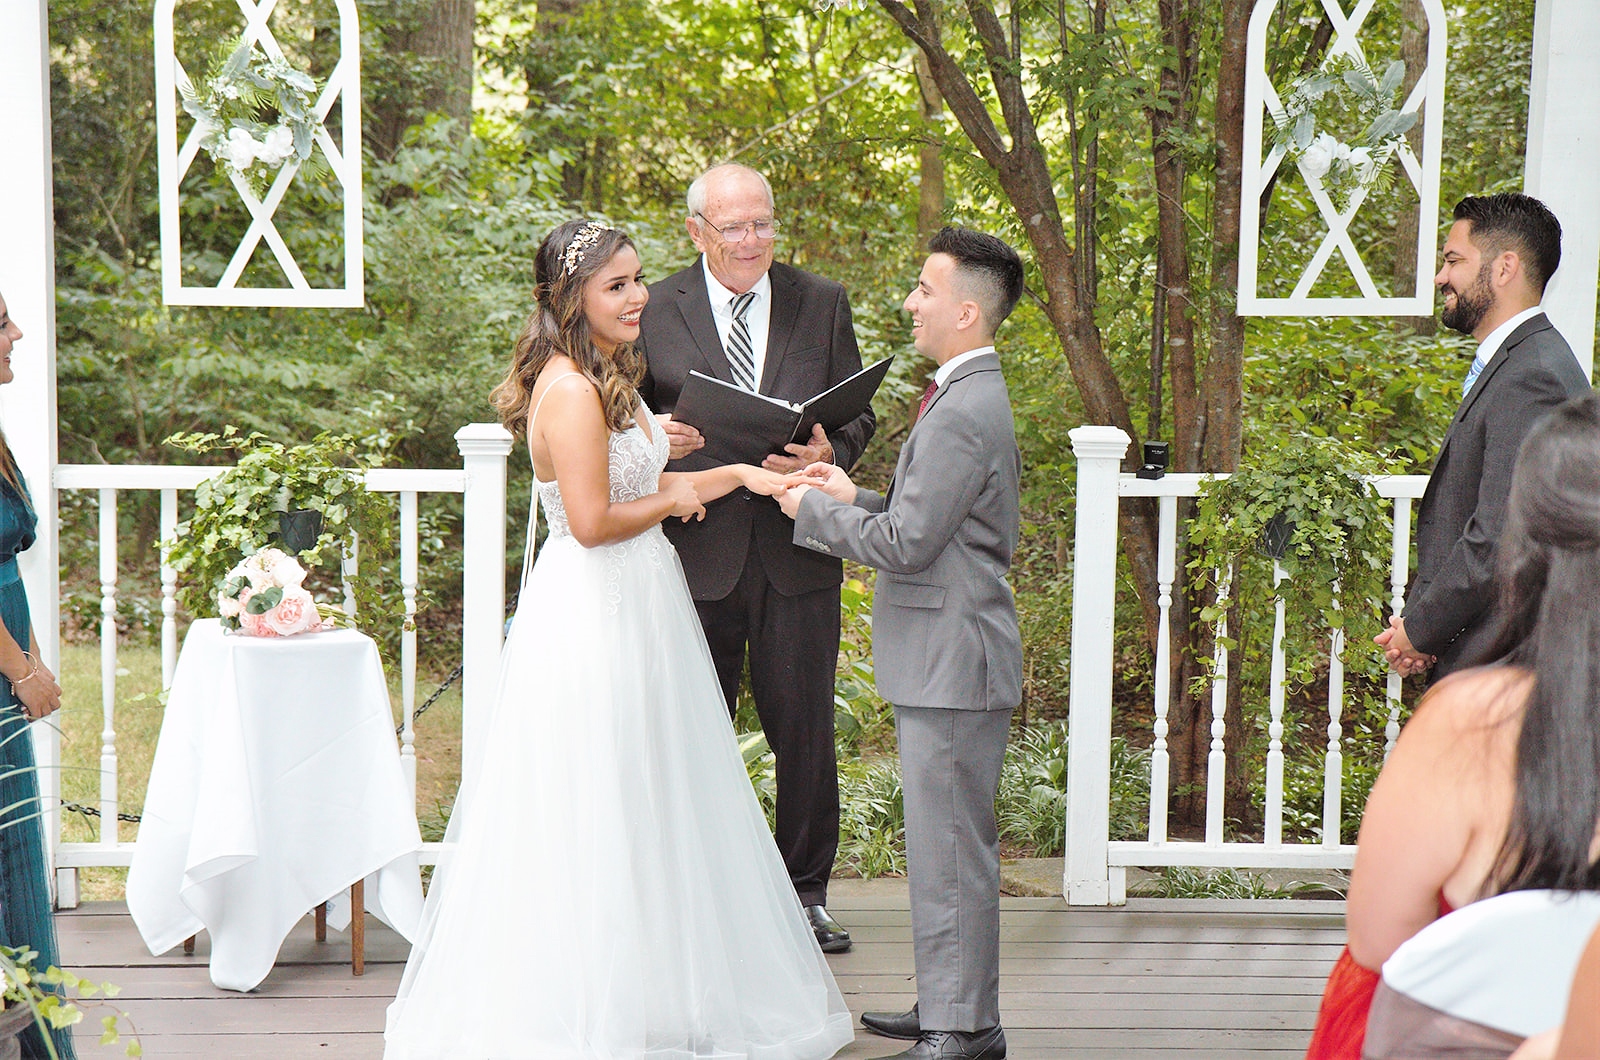 Bride and groom share a laugh during ceremony.